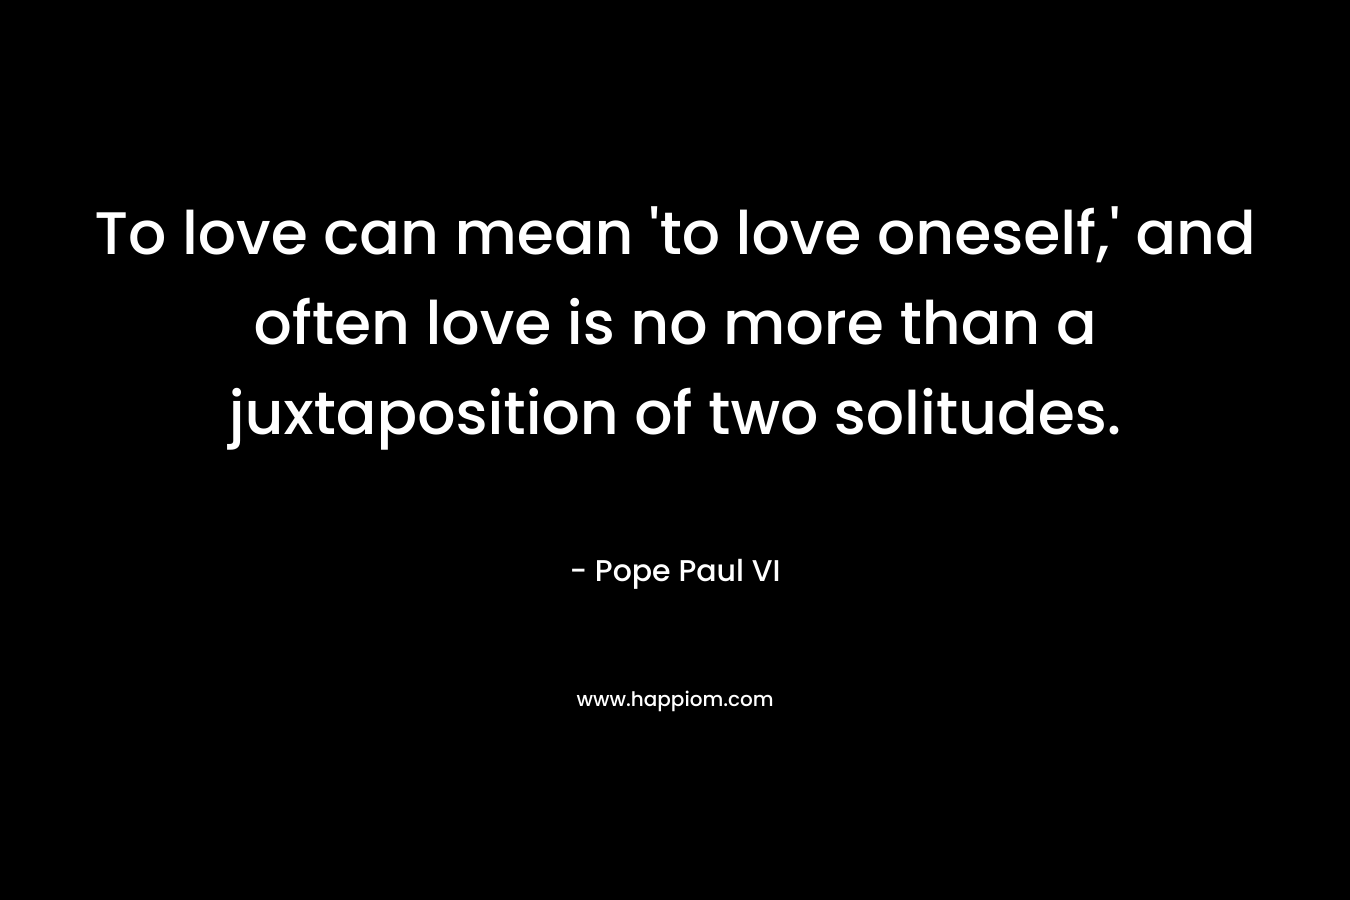 To love can mean 'to love oneself,' and often love is no more than a juxtaposition of two solitudes.